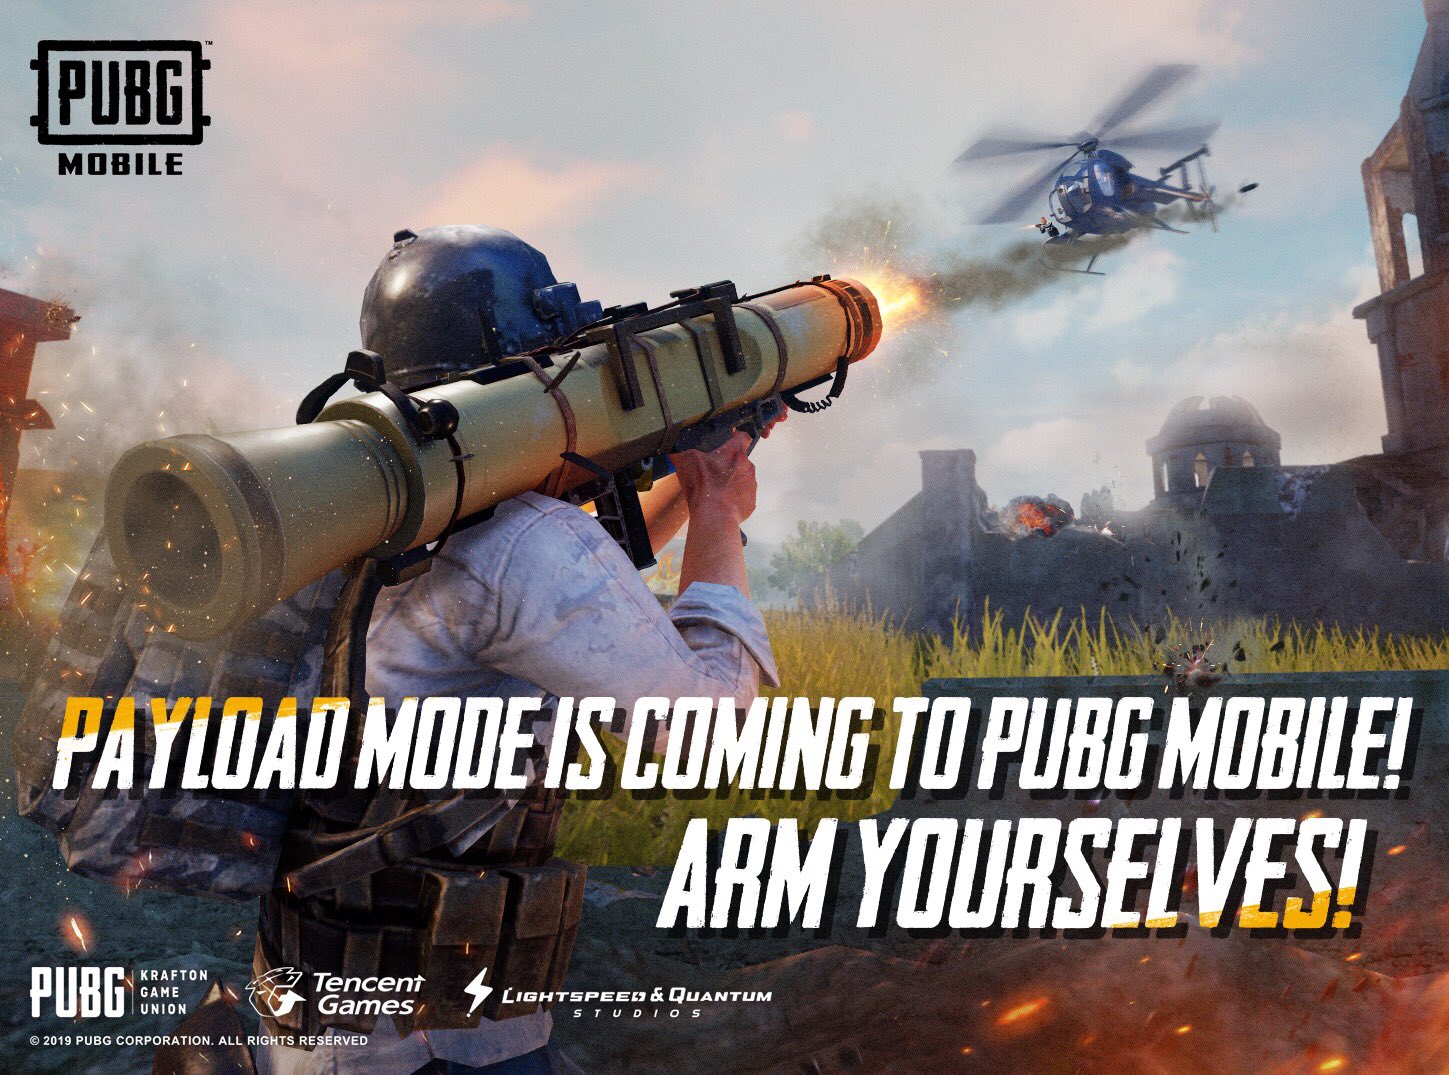 PUBG Mobile 0.15.0 update comes with Payload mode, BRDM tank ... - 